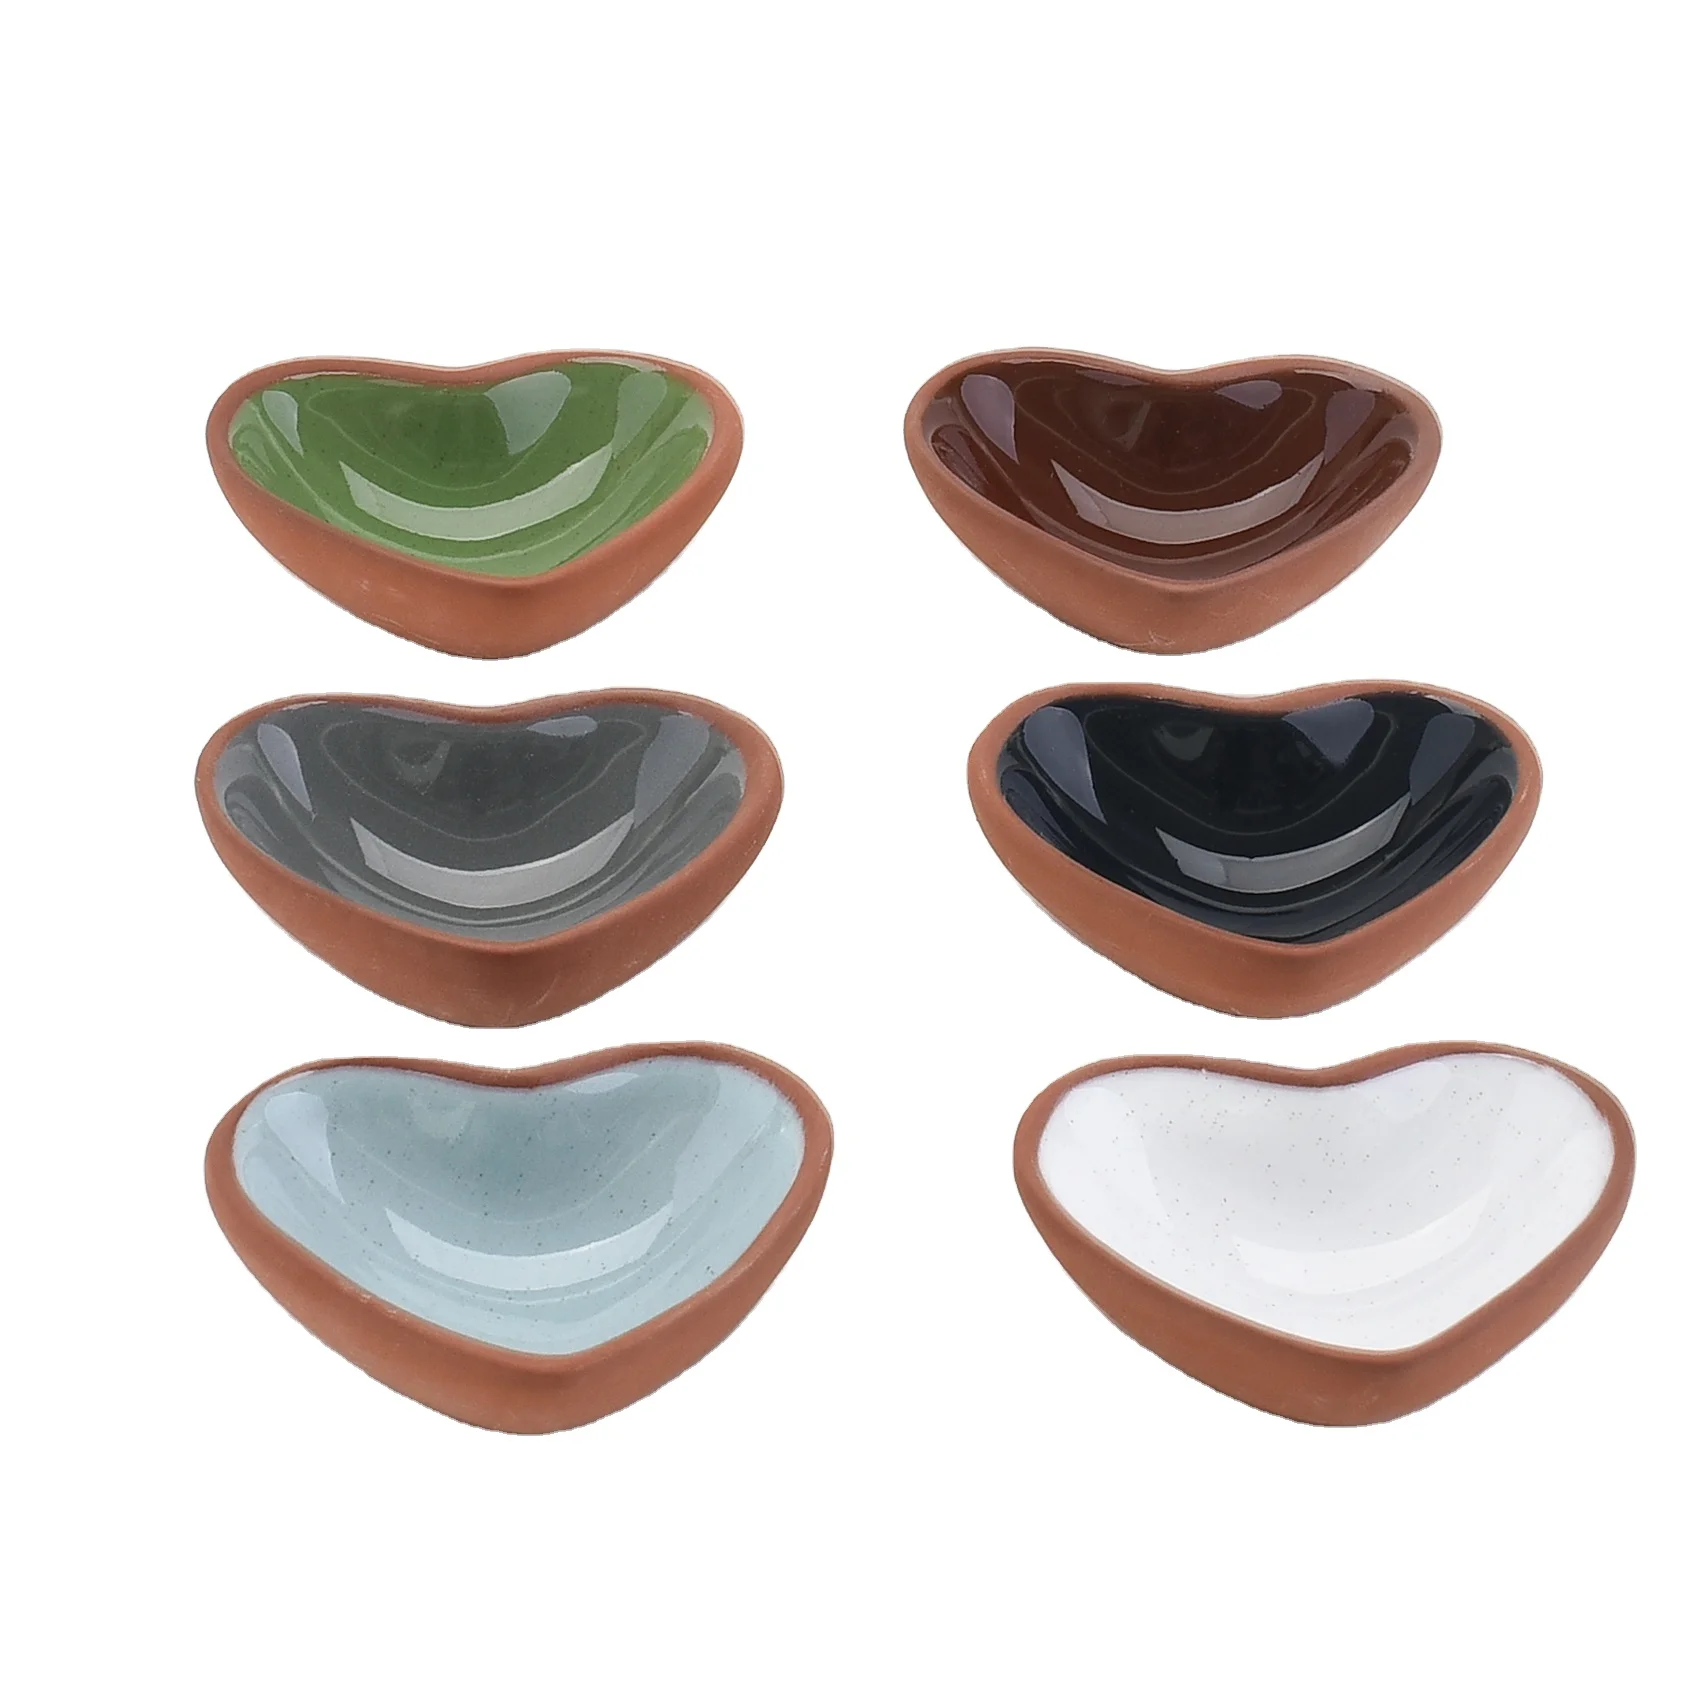 

Terracotta Mini Bowls Set For Soy Sauce Ceramic Small Bowl Set of 6 Pieces Heart Shape